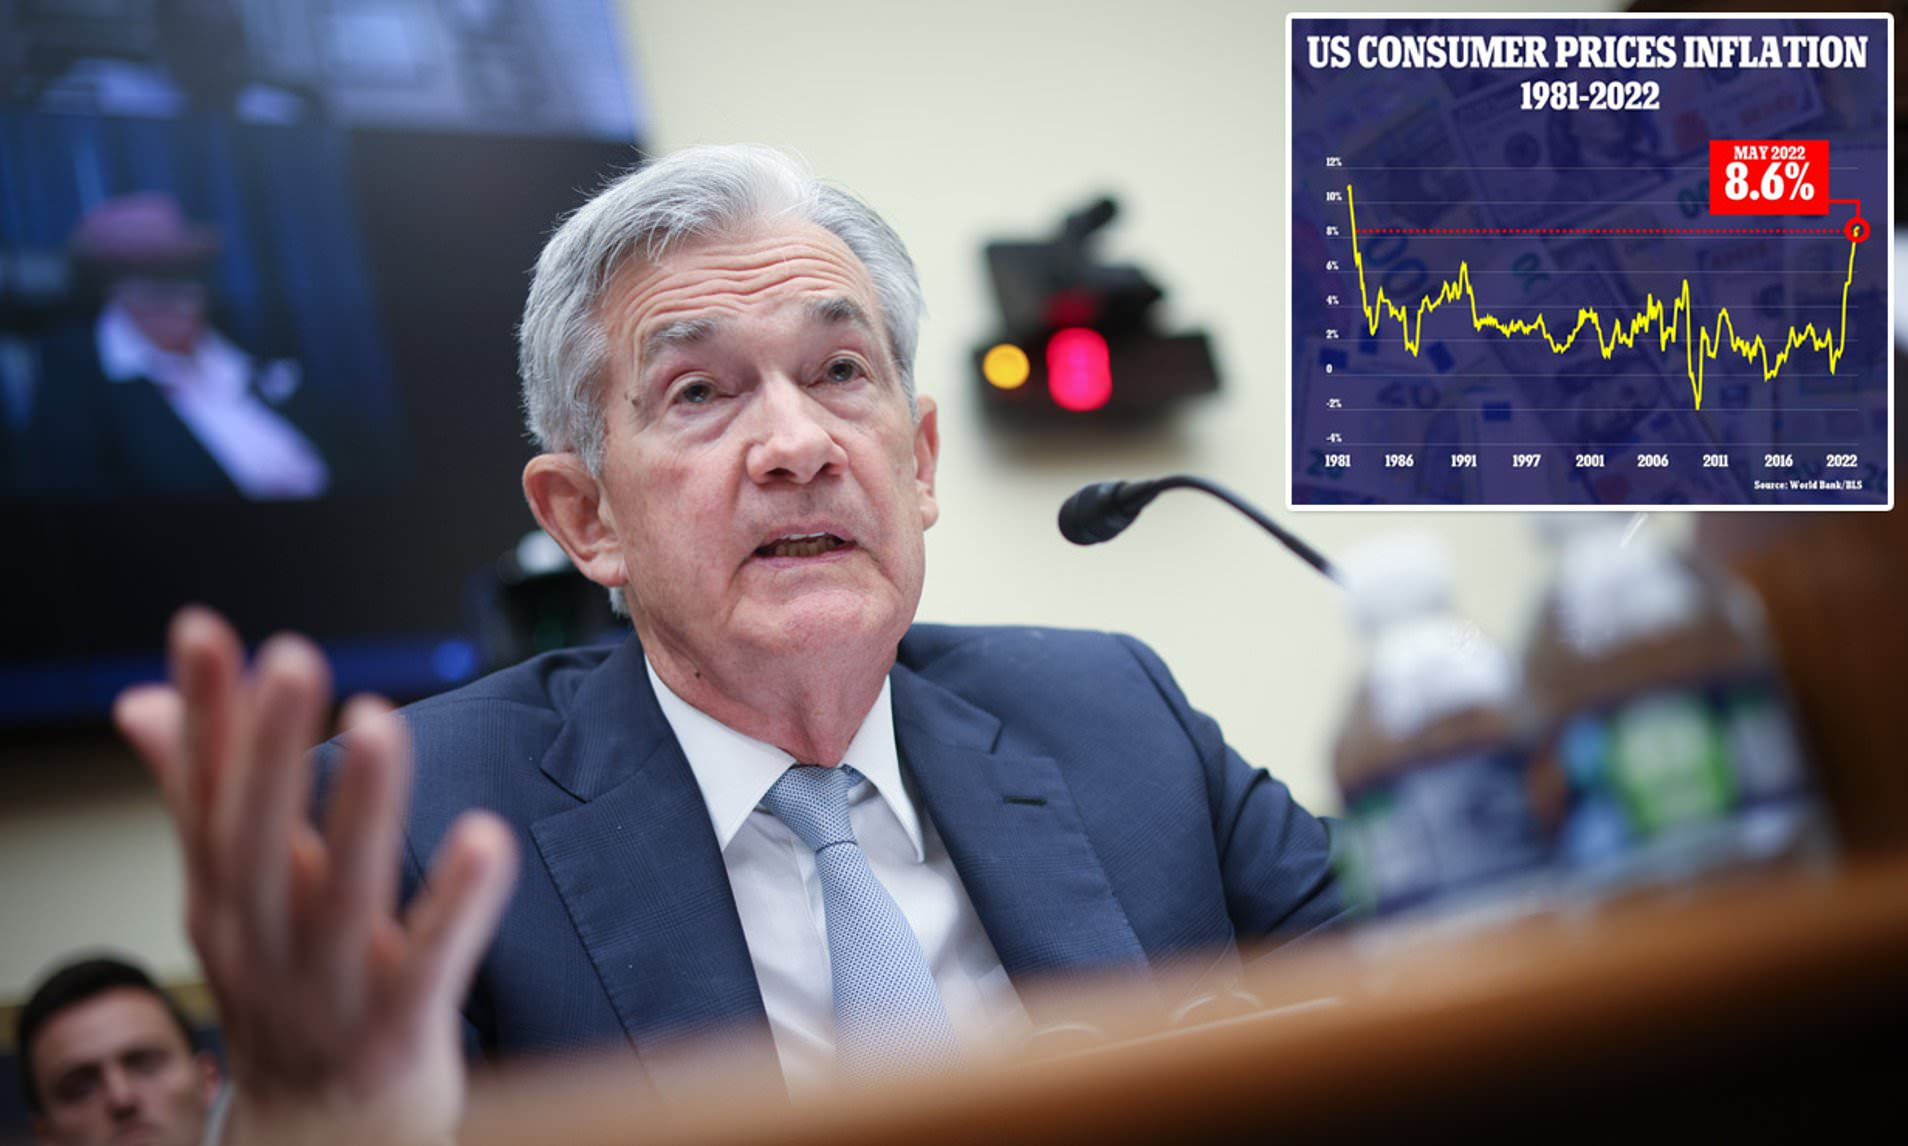 Fed Chair Jerome Powell warns government debt is on an unsustainable path